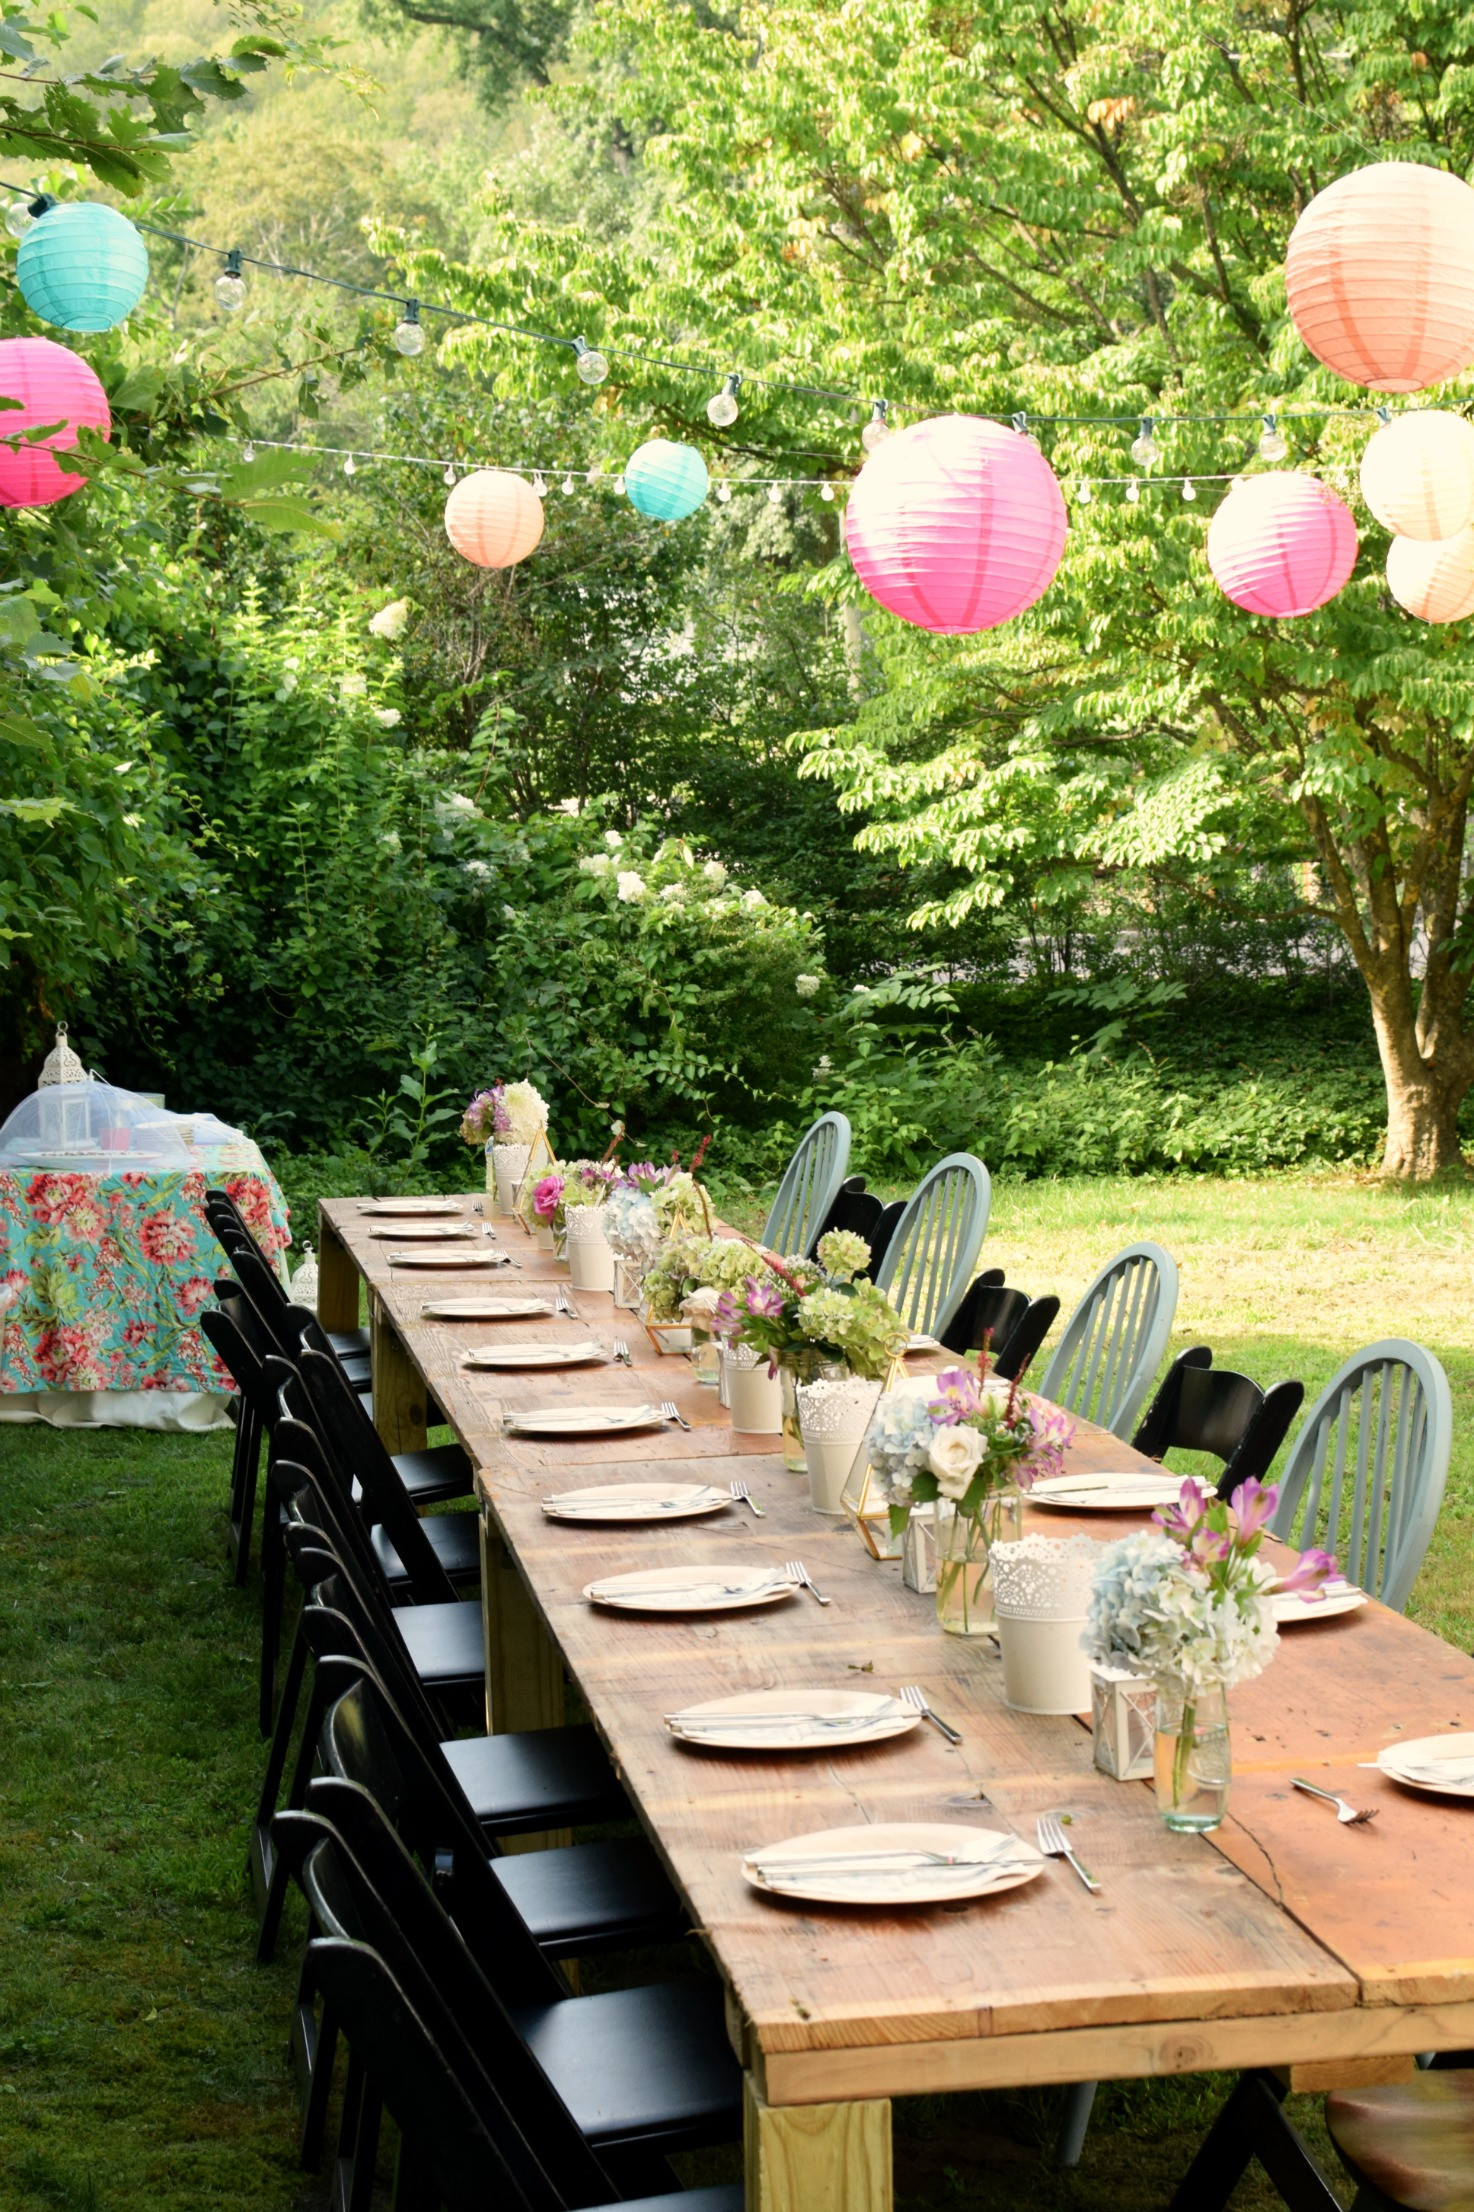 Backyard Party Decoration Ideas
 Charming Garden Party perfect for your next party idea